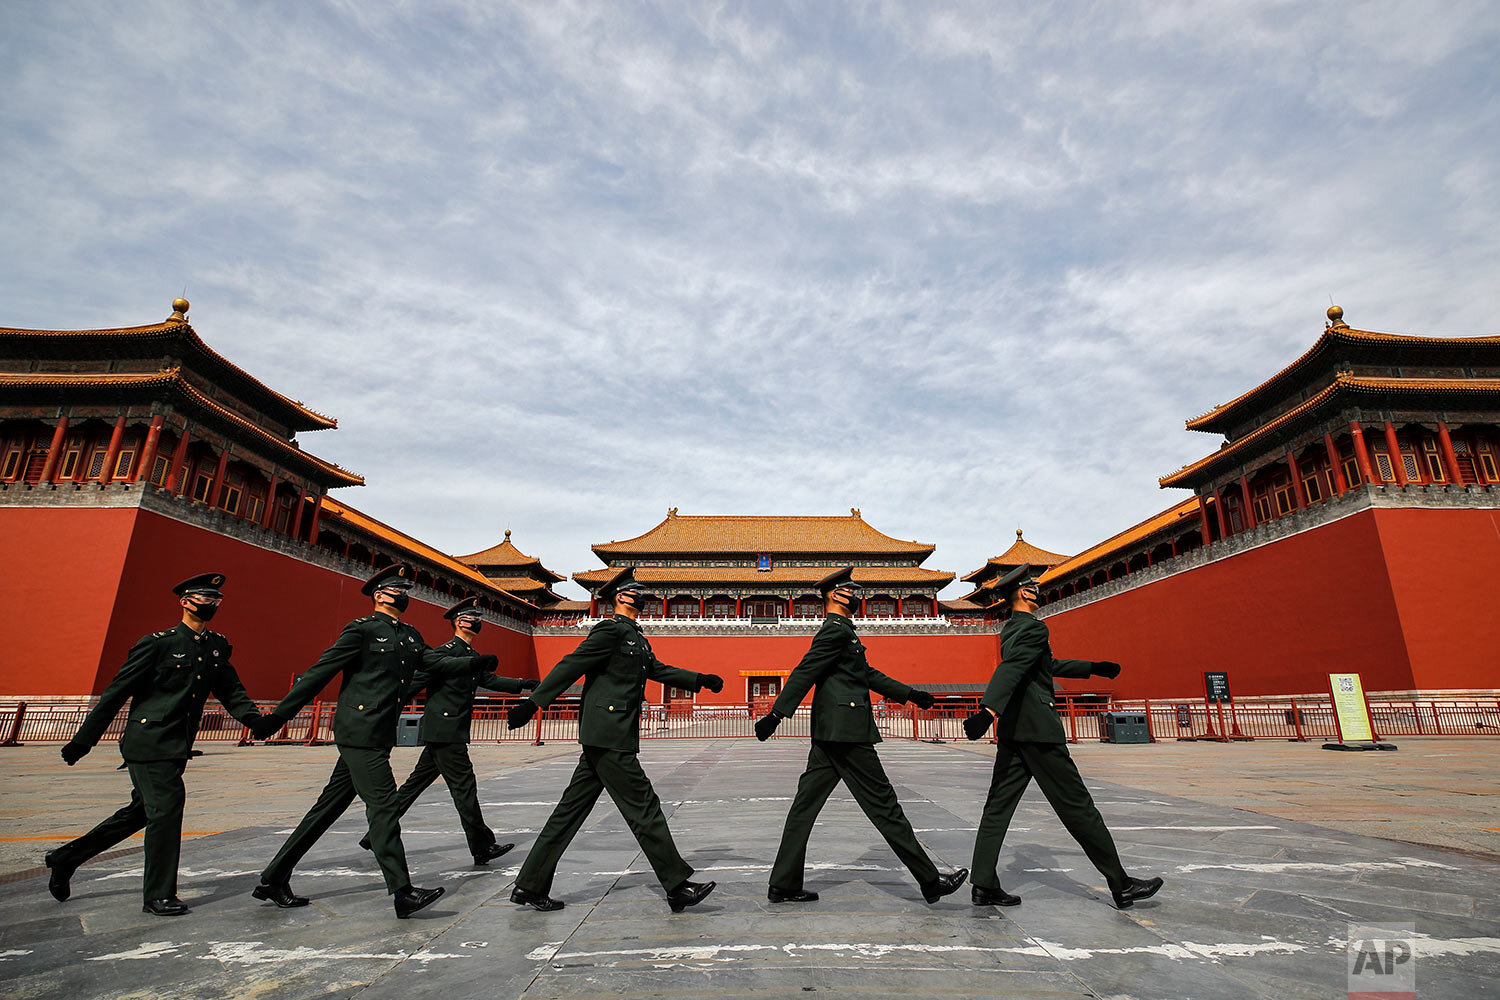  Soldiers wearing protective face masks march past the closed entrance gates to the Forbidden City, usually crowded with tourists before the new coronavirus outbreak in Beijing, Thursday, March 12, 2020.  (AP Photo/Andy Wong) 